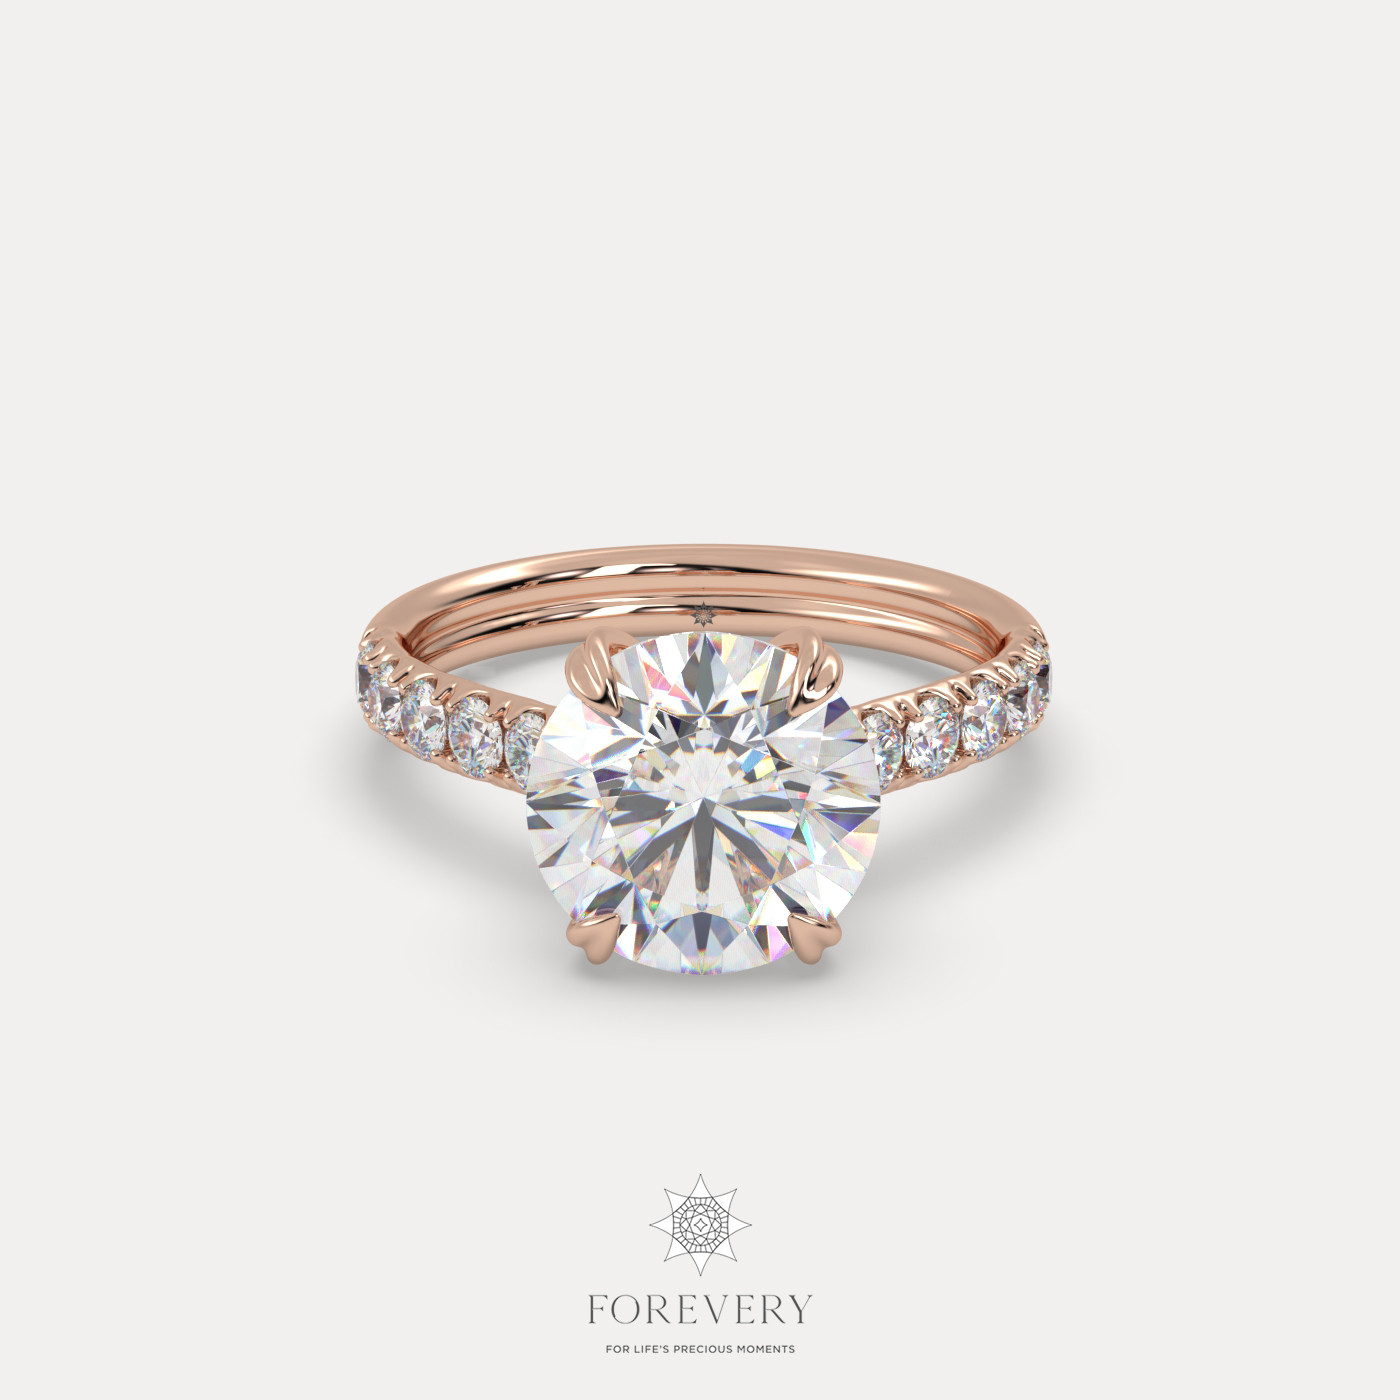 18K ROSE GOLD Round Cut Pave-Style Diamond Engagament Ring